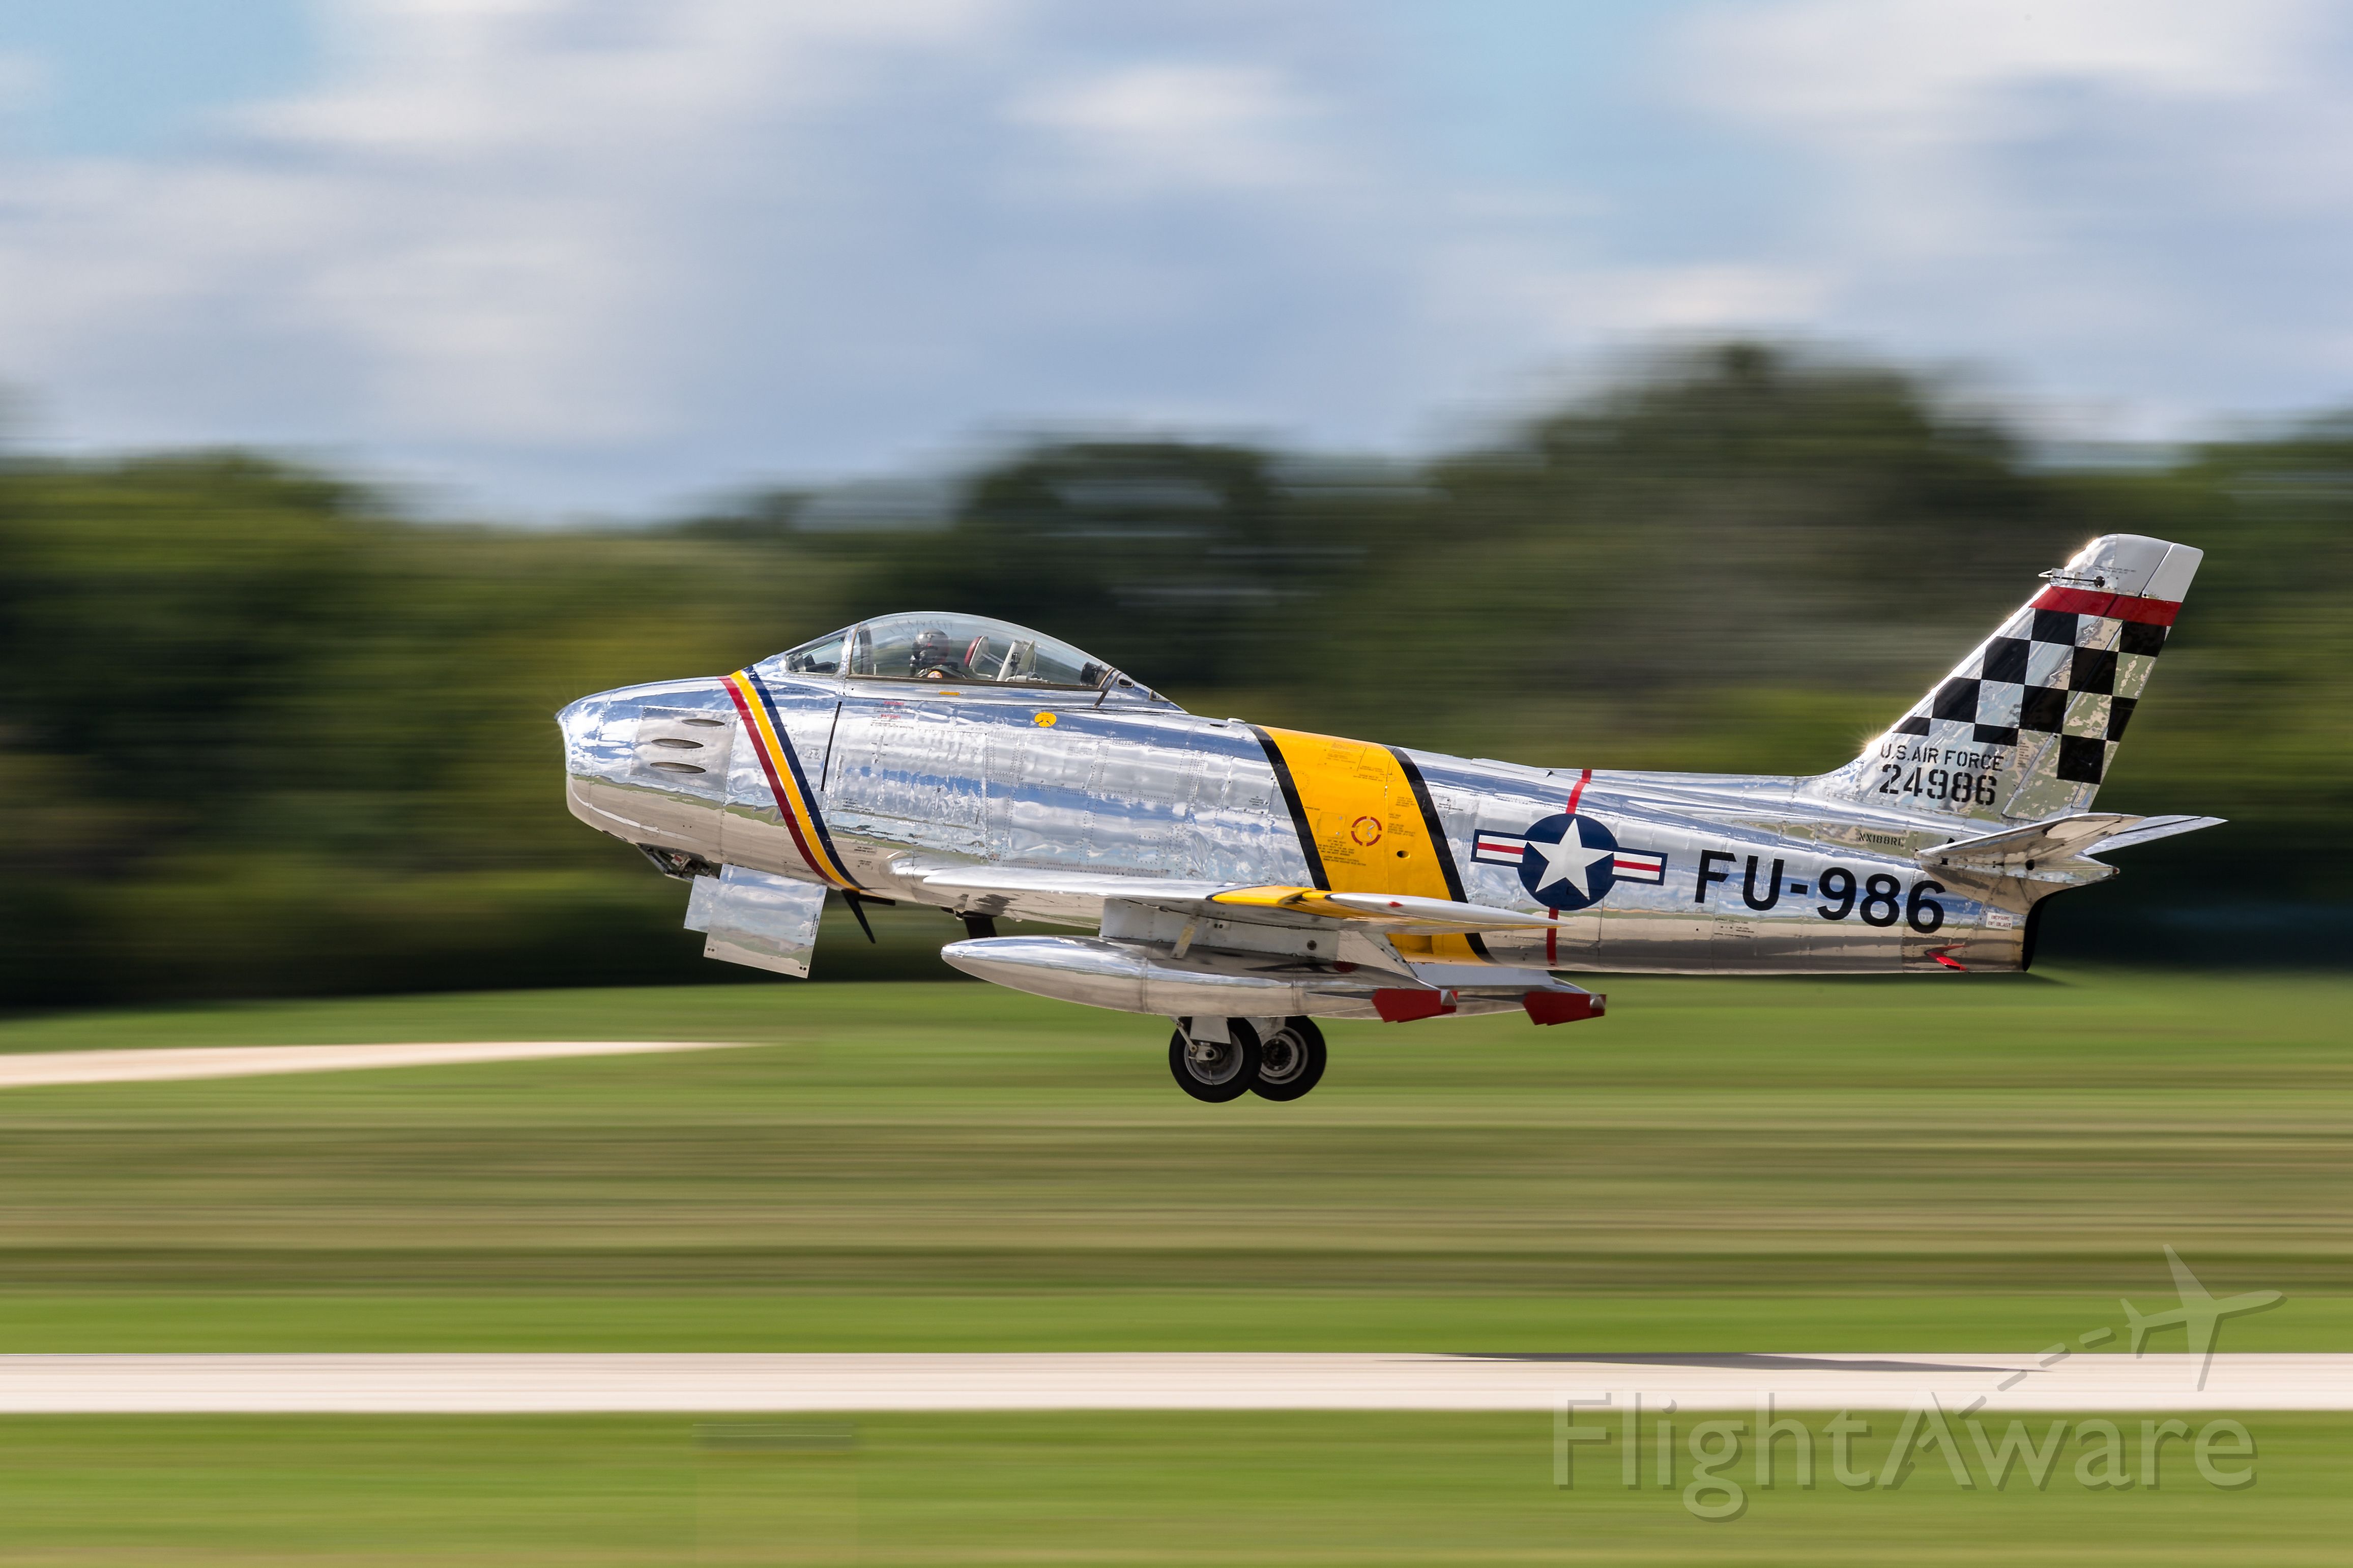 North American F-86 Sabre (NX188RL) - F-86 Sabre flying at the 2016 Northern Illinois Airshow (formerly known as Wings Over Waukegan). Feel free to checkout some of my other photos. a rel=nofollow href=http://michaeltowster.smugmug.com/Airshowshttp://michaeltowster.smugmug.com/Airshows/a